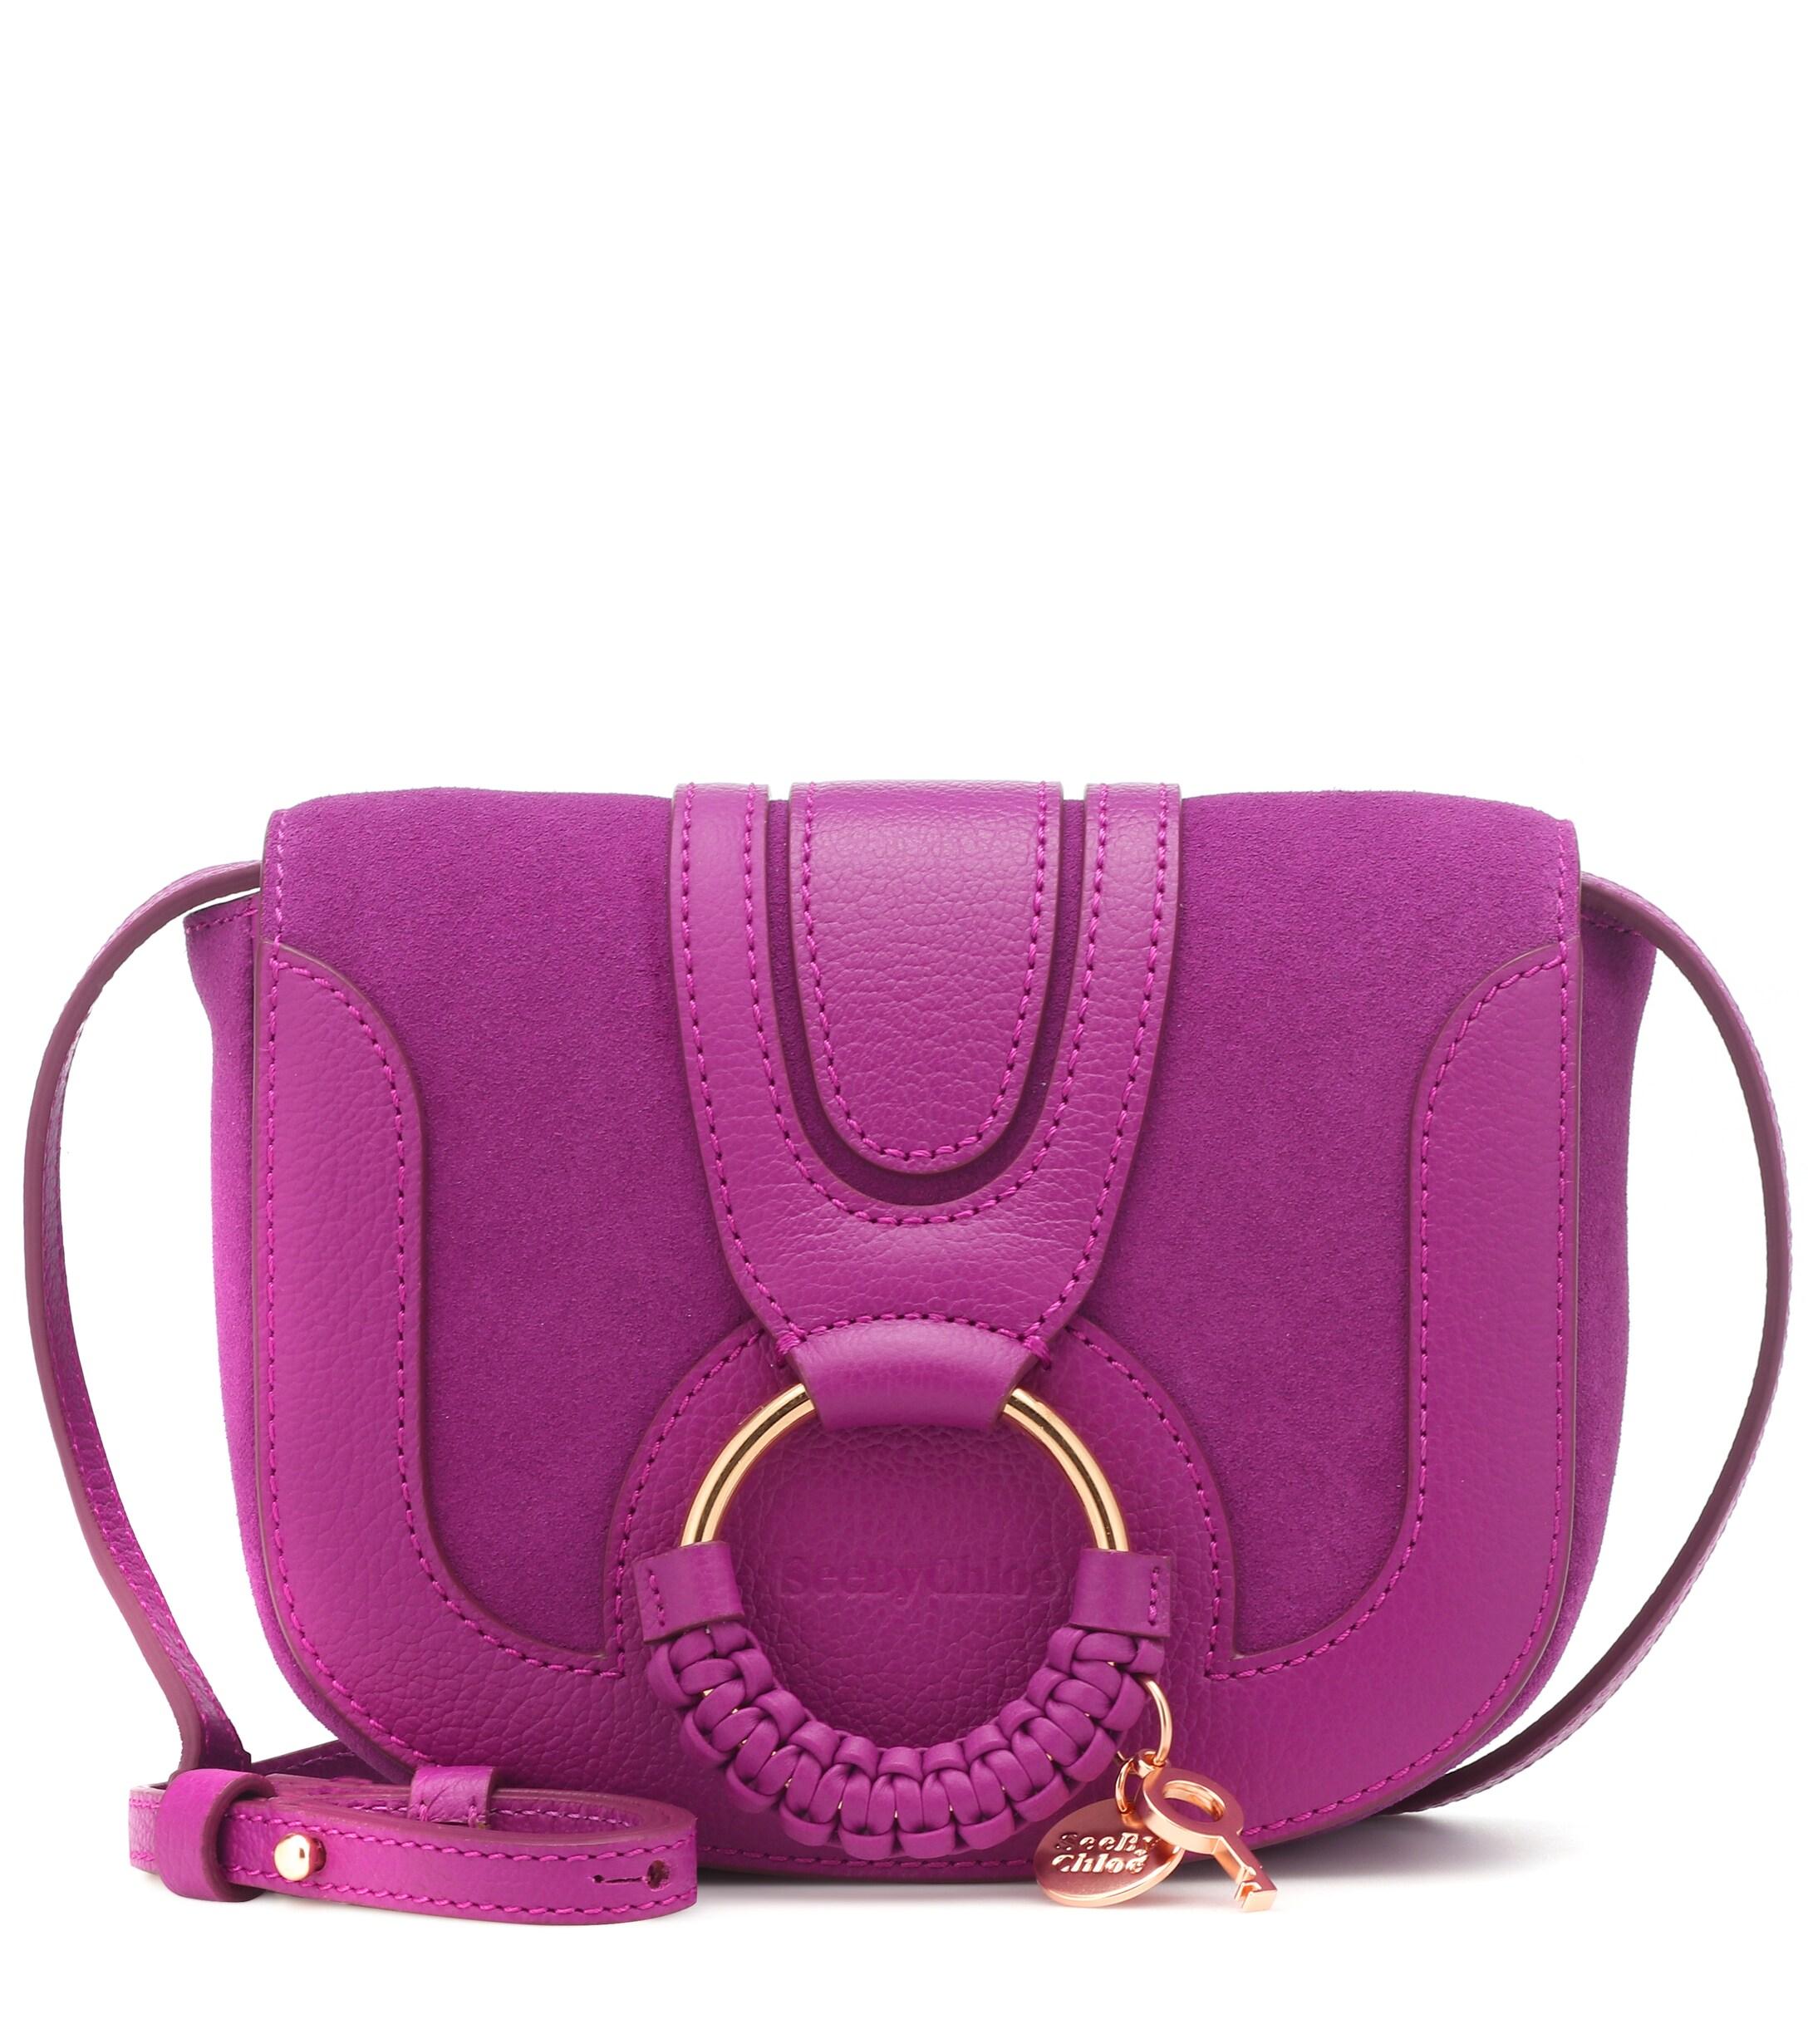 See By Chloé Hana Mini Leather Shoulder Bag in Purple - Save 9% - Lyst